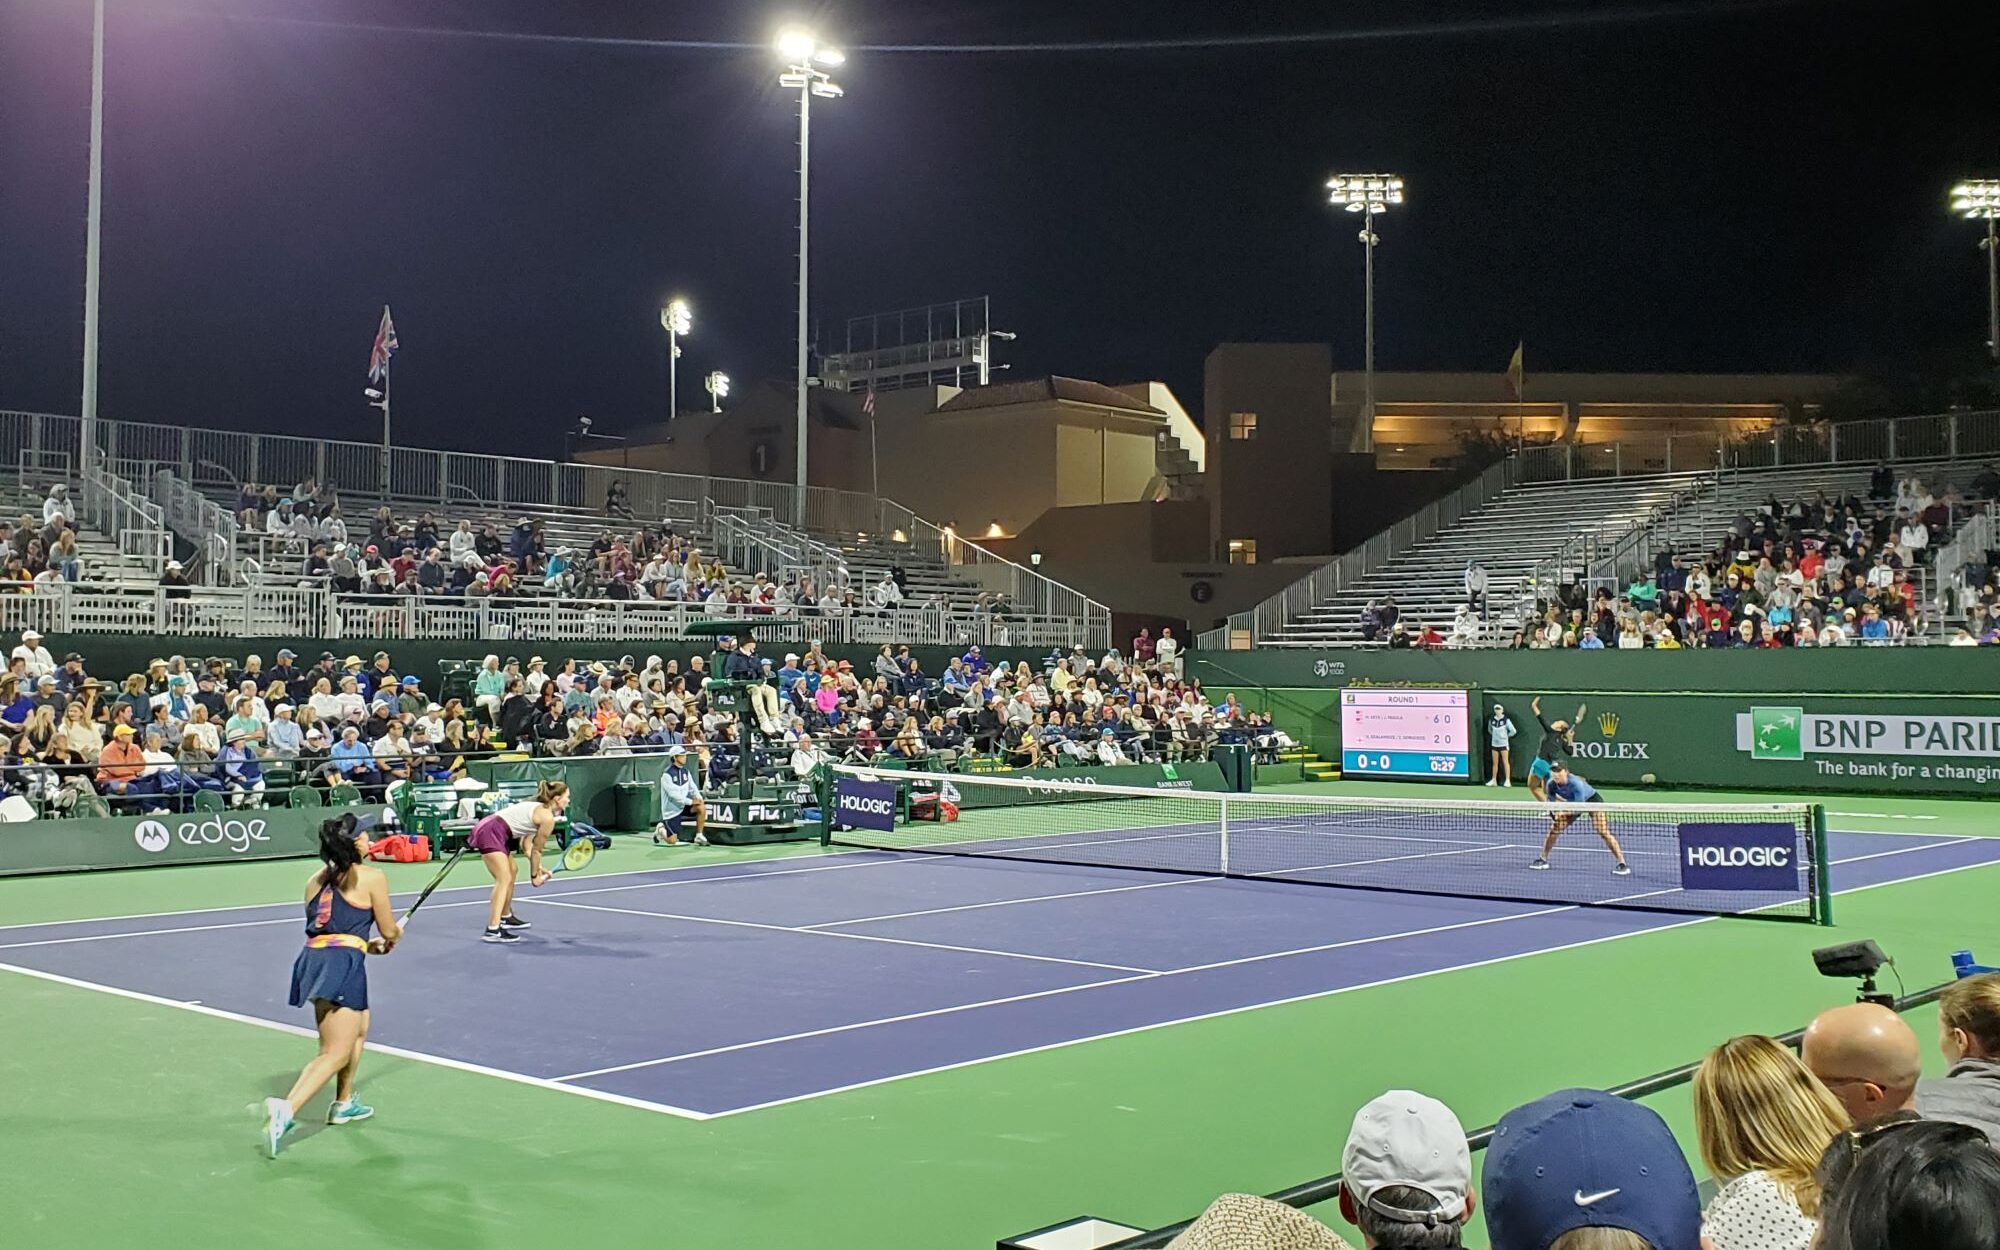 WTA Doubles Match at Indian Wells